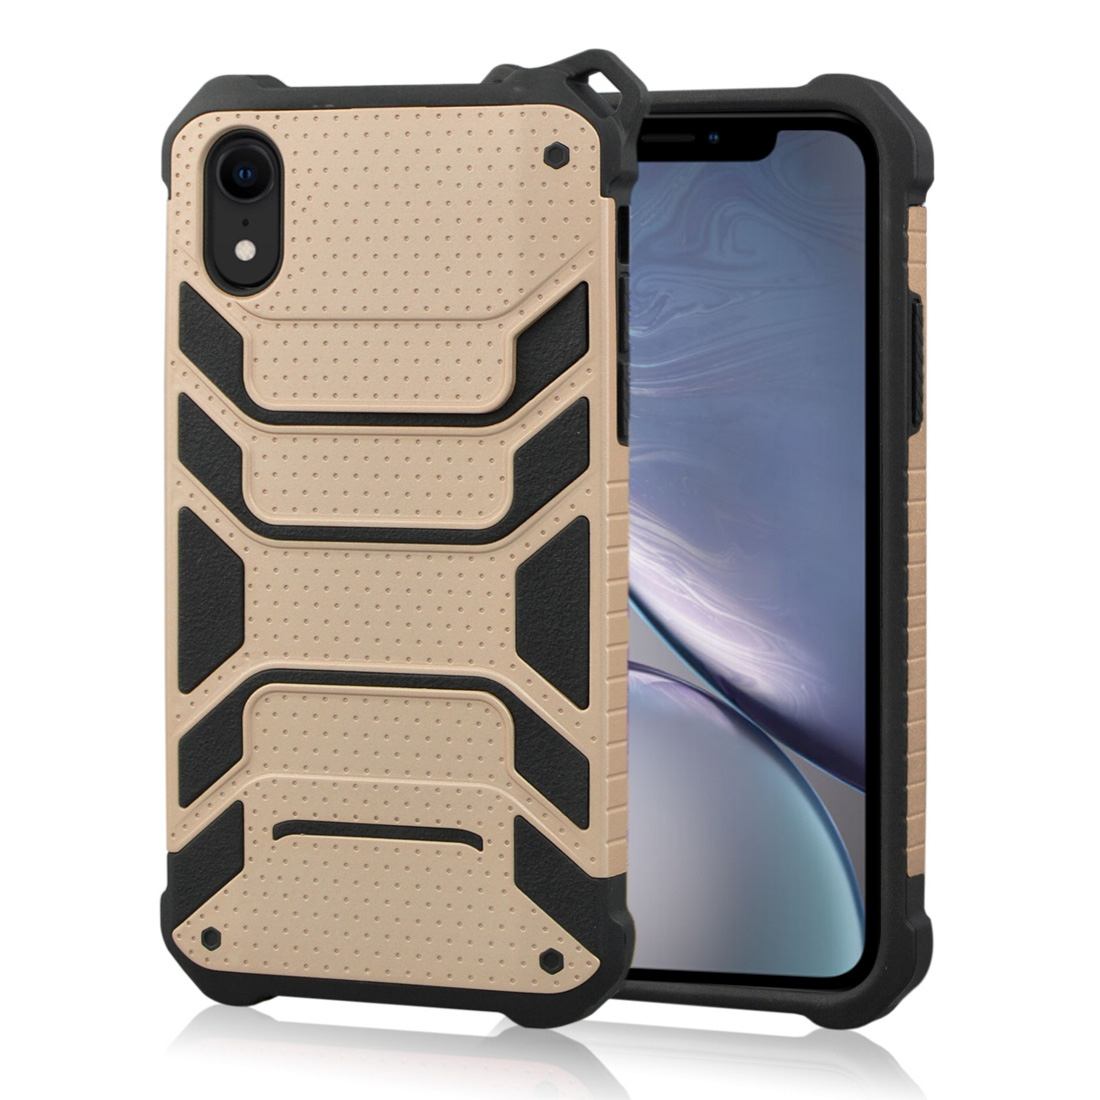 Shockproof Armour Protective Case For iPhone XR,Rose Gold